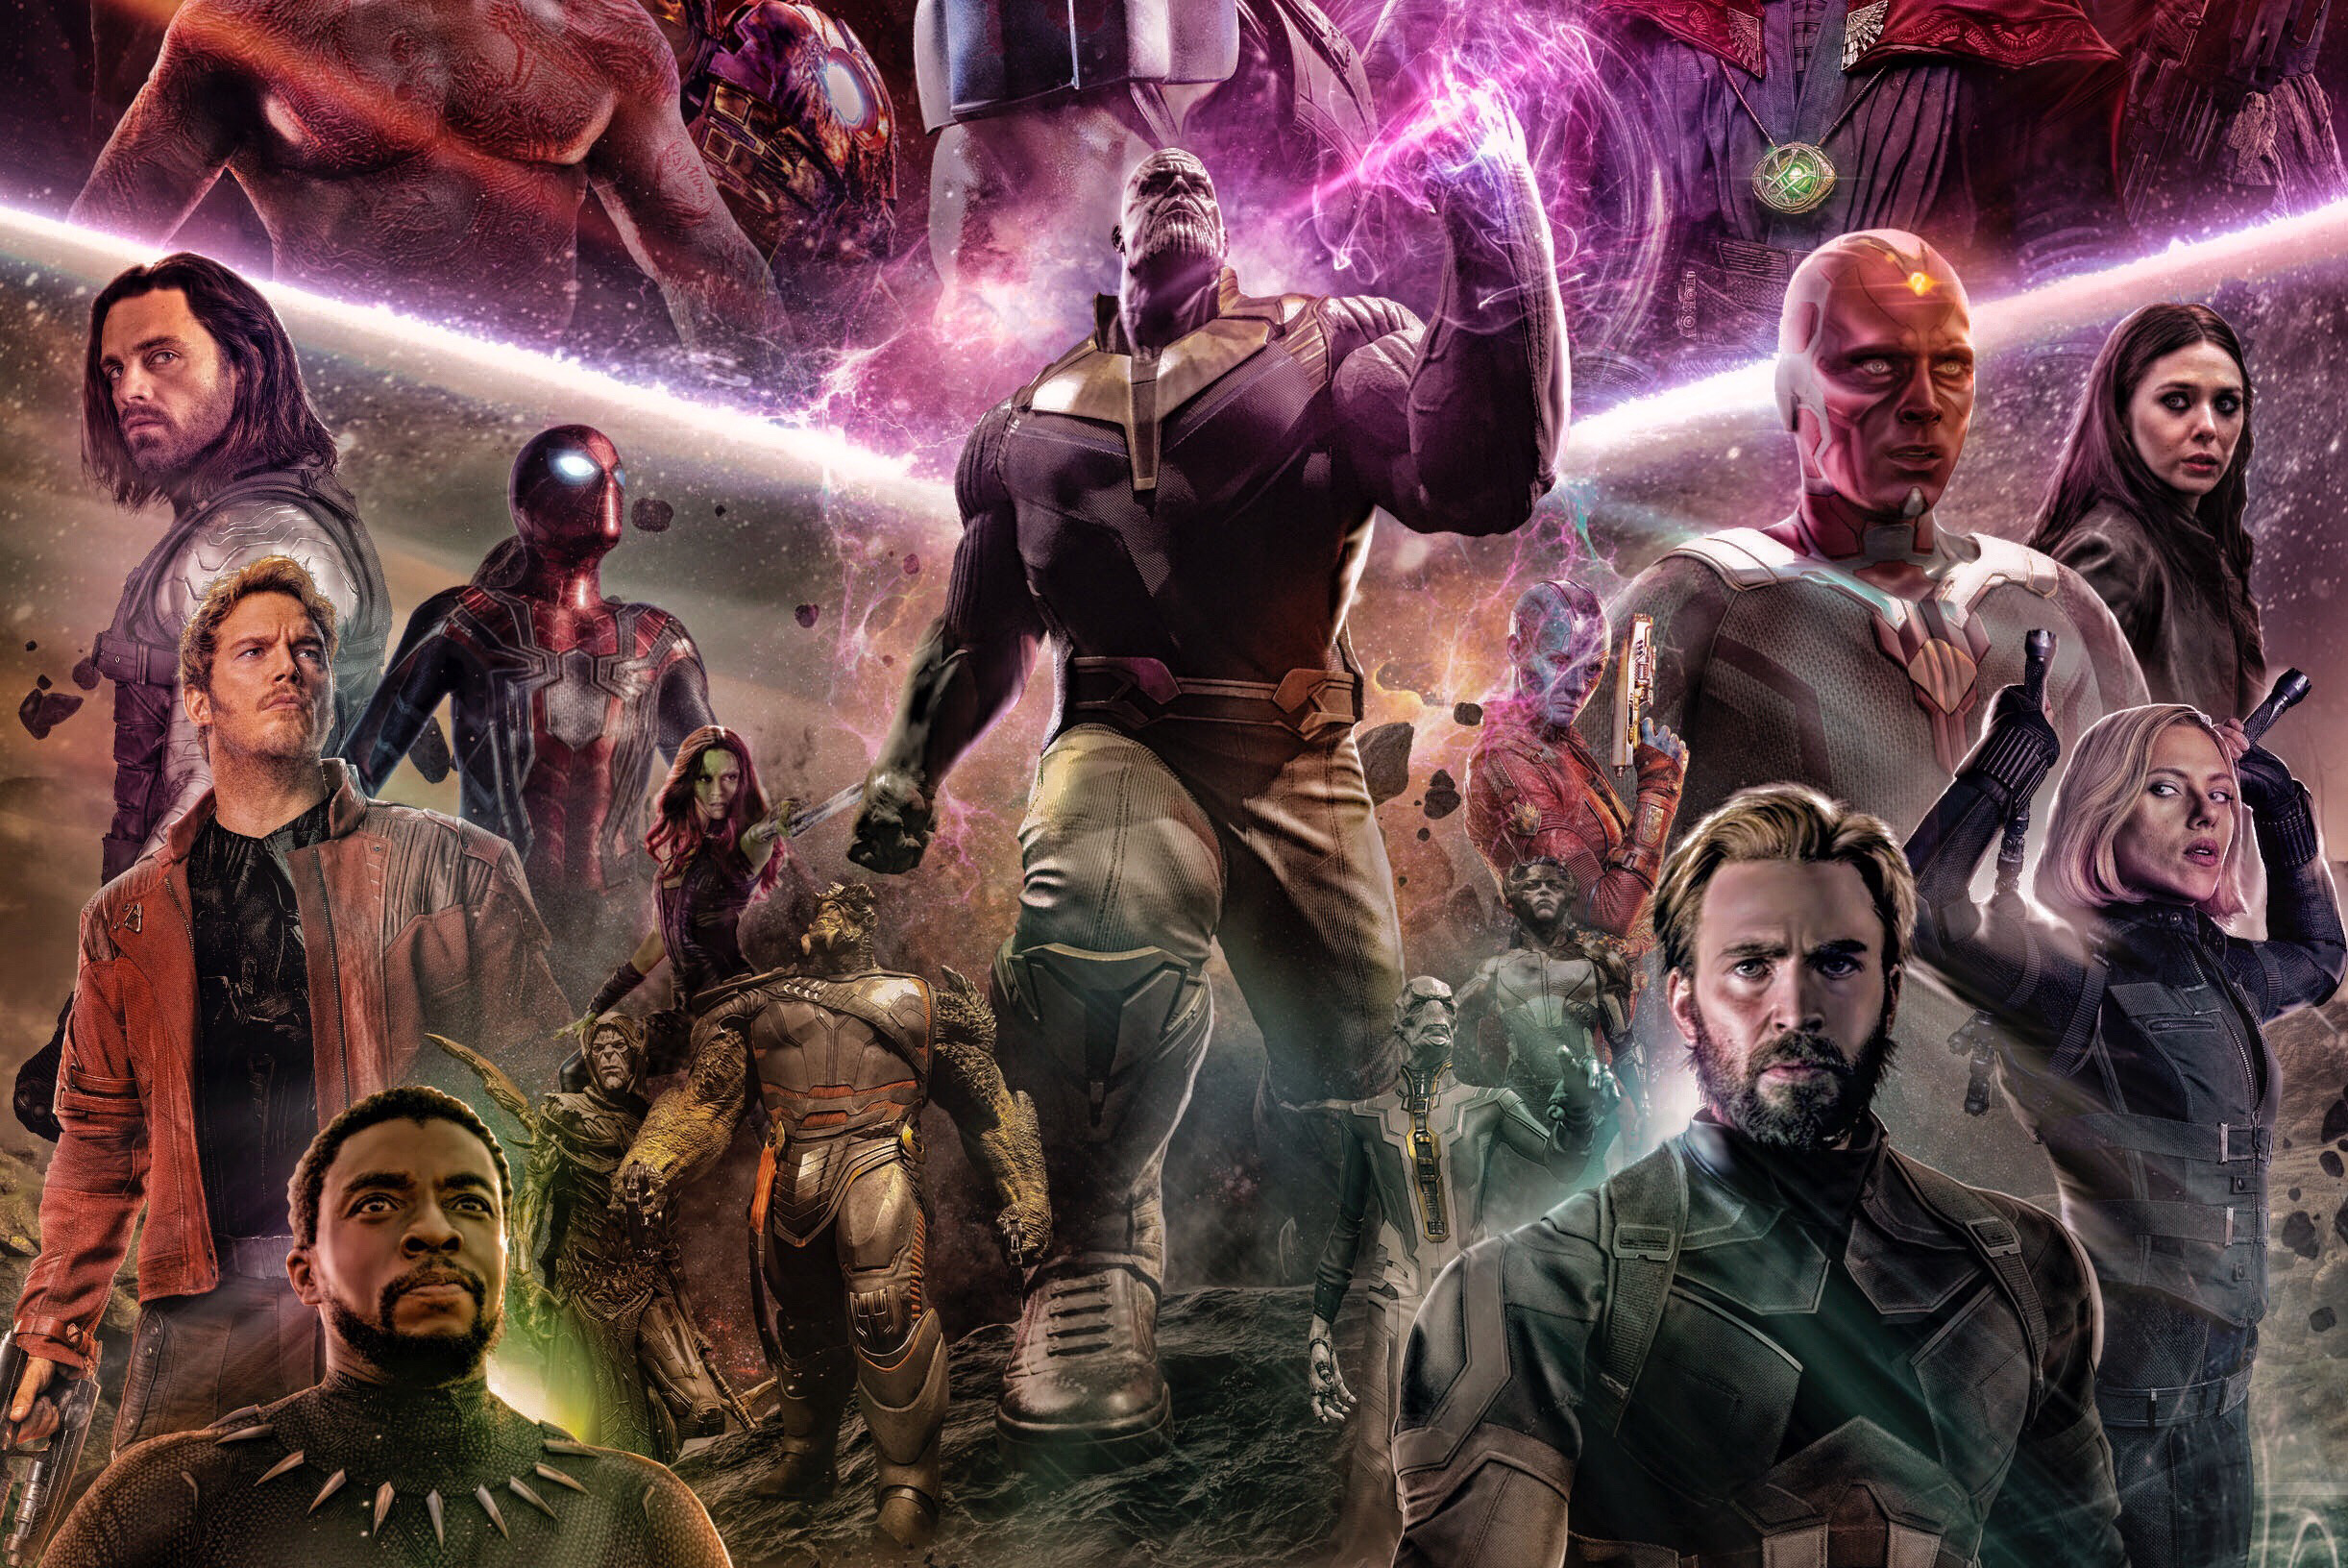 Free download wallpaper Spider Man, Captain America, Movie, Black Panther (Marvel Comics), Black Widow, Vision (Marvel Comics), Scarlet Witch, Star Lord, Winter Soldier, Gamora, Thanos, Nebula (Marvel Comics), Avengers: Infinity War on your PC desktop